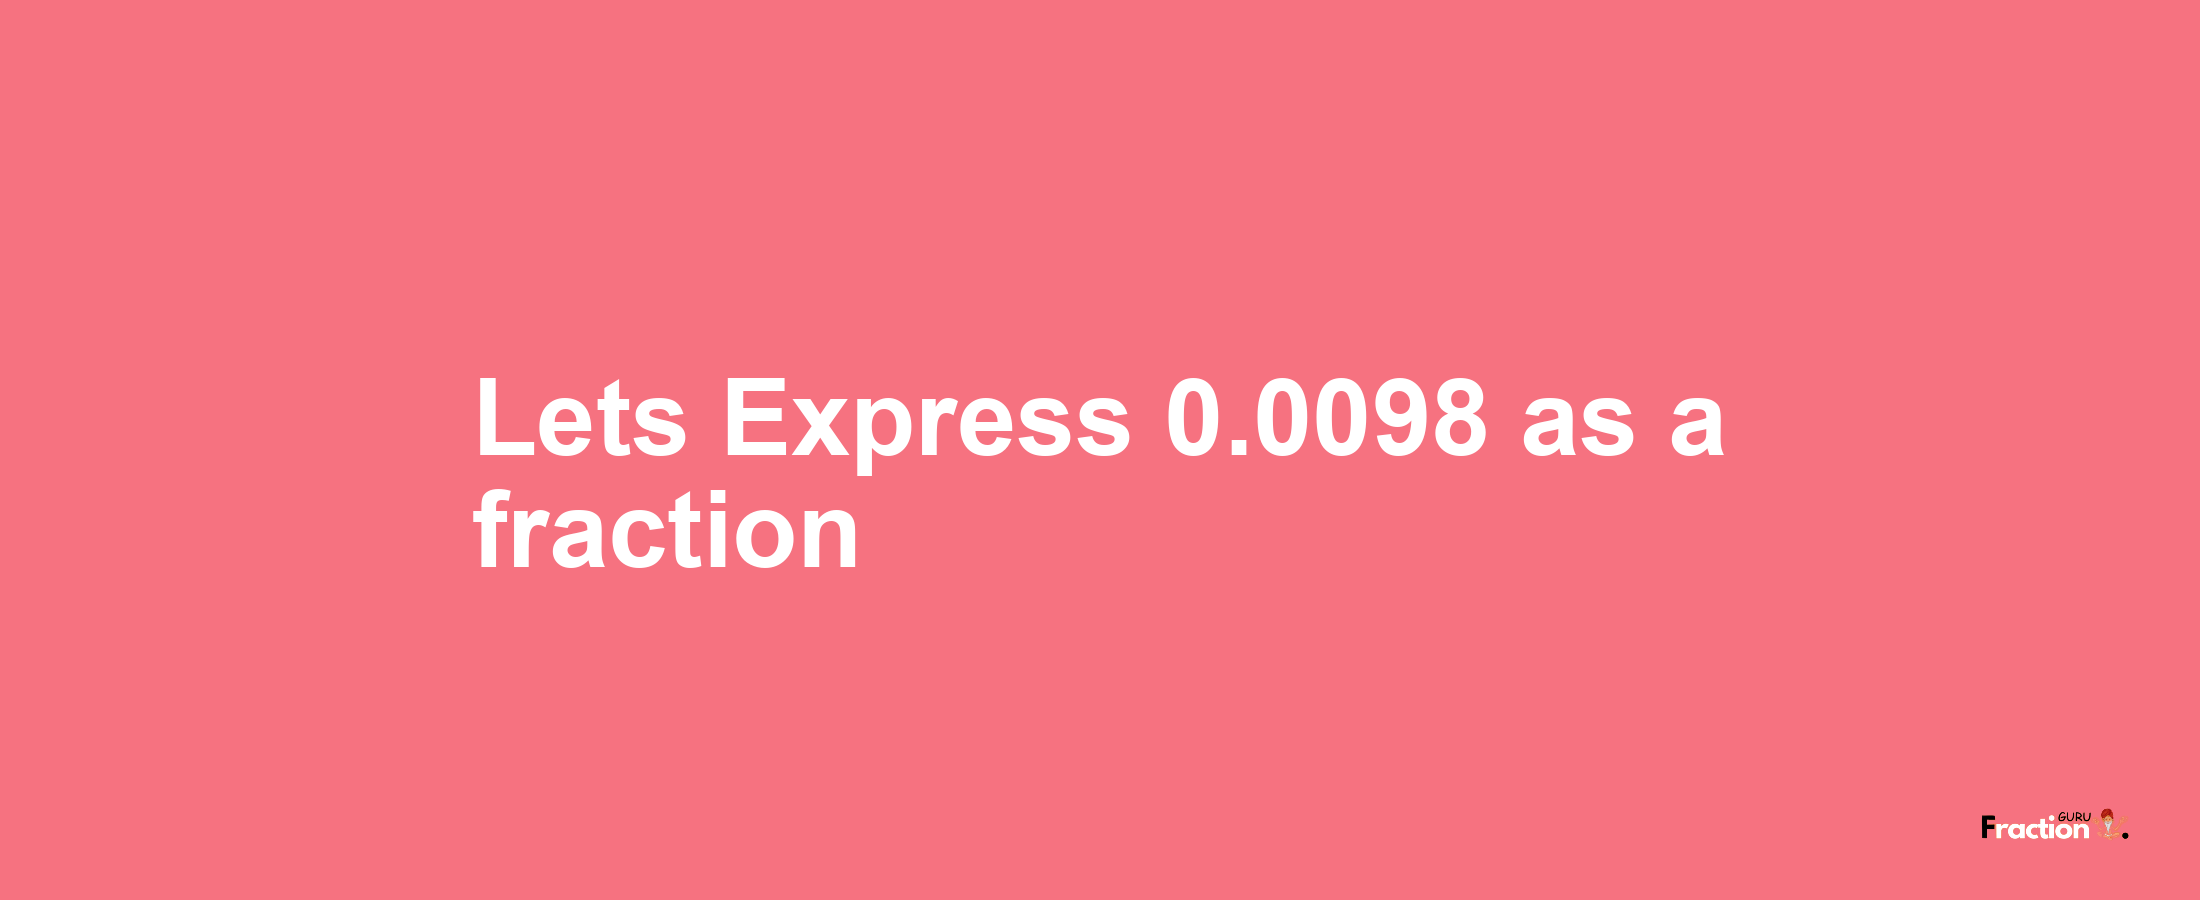 Lets Express 0.0098 as afraction